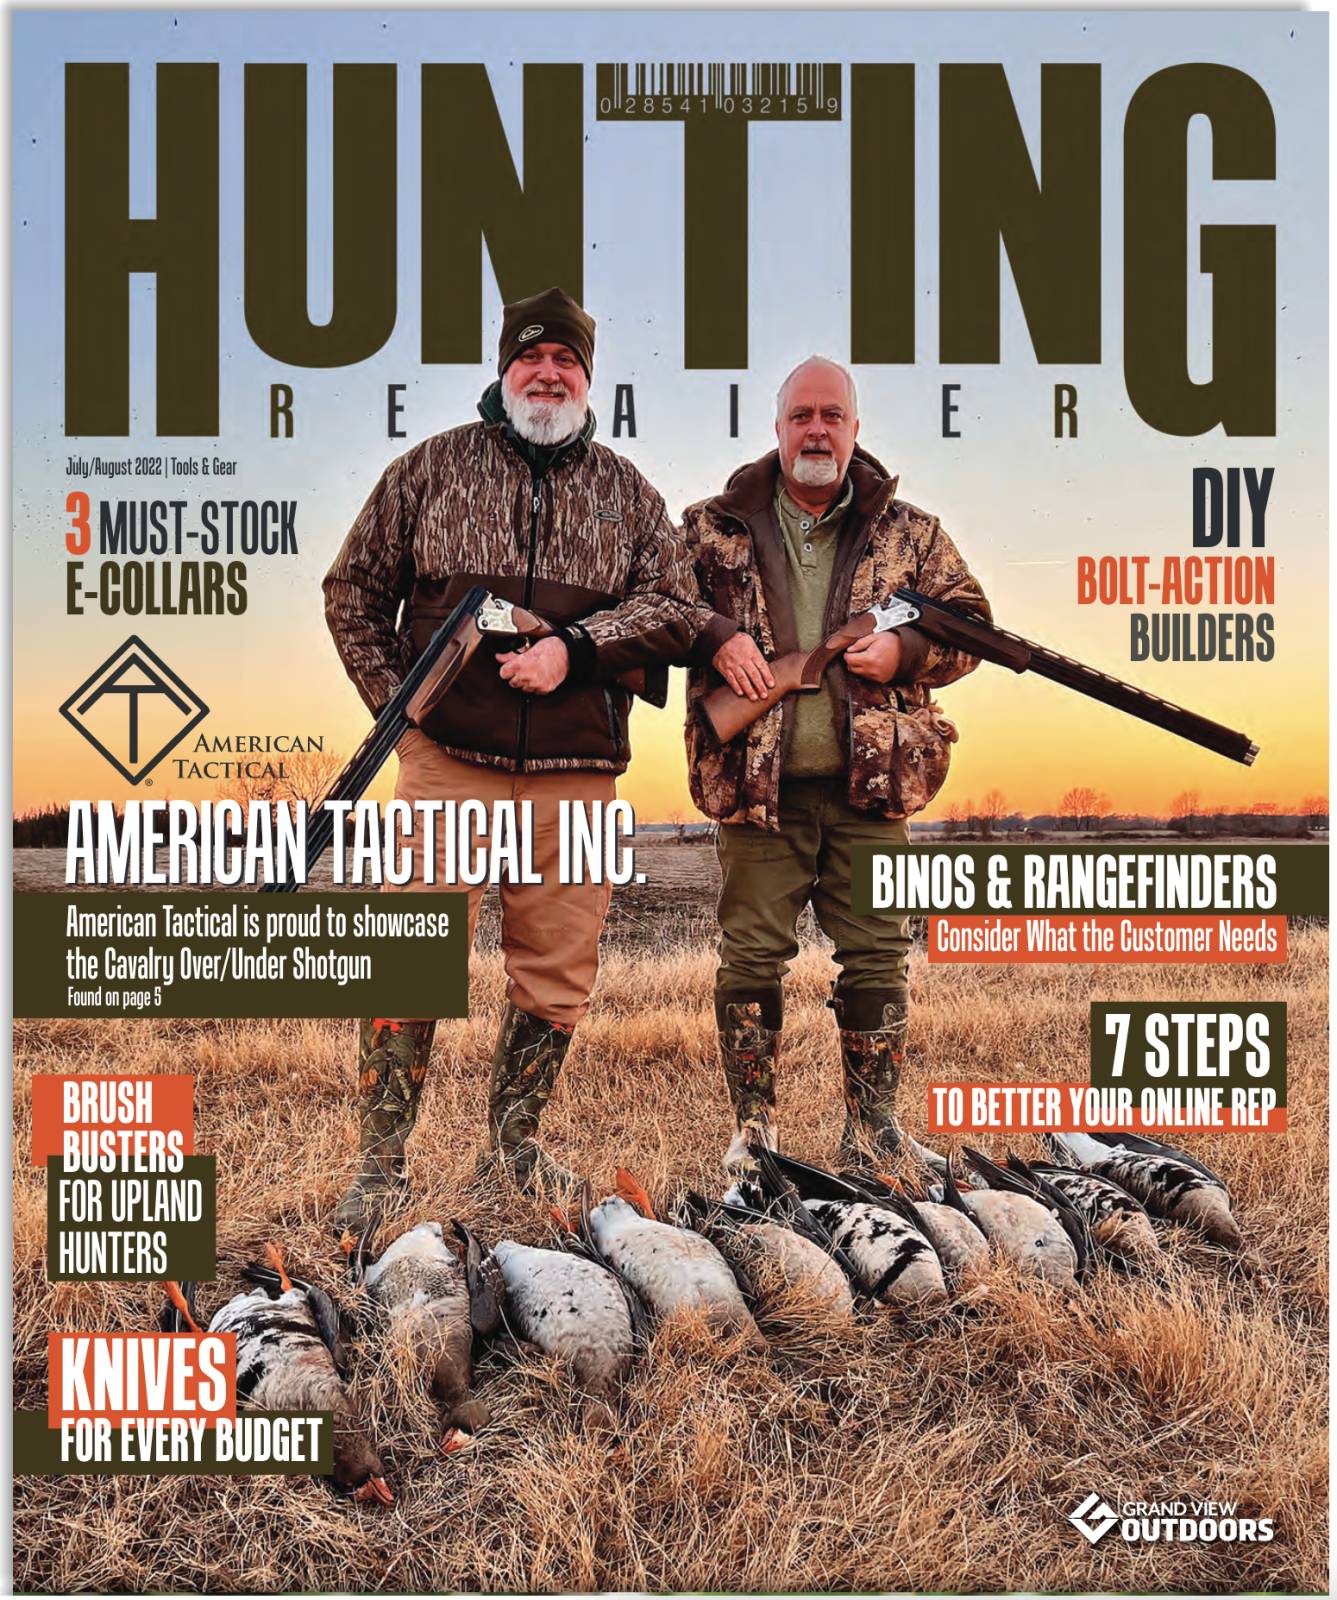 Inside the July/August 2022 E-Zine of Hunting Retailer